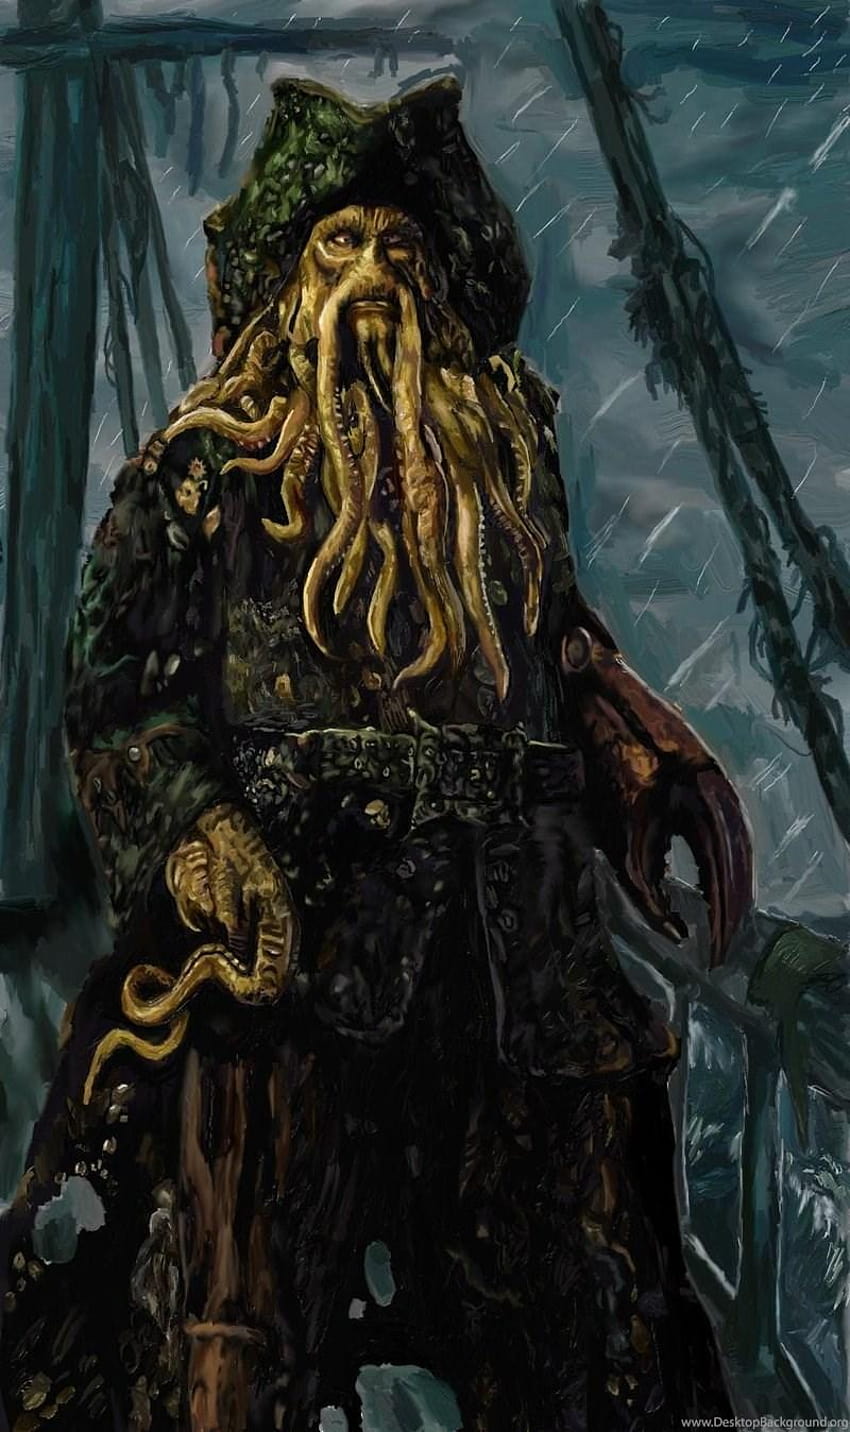 Davy Jones Painting By PC Chipmunk On Backgrounds, davy jones phone HD phone wallpaper